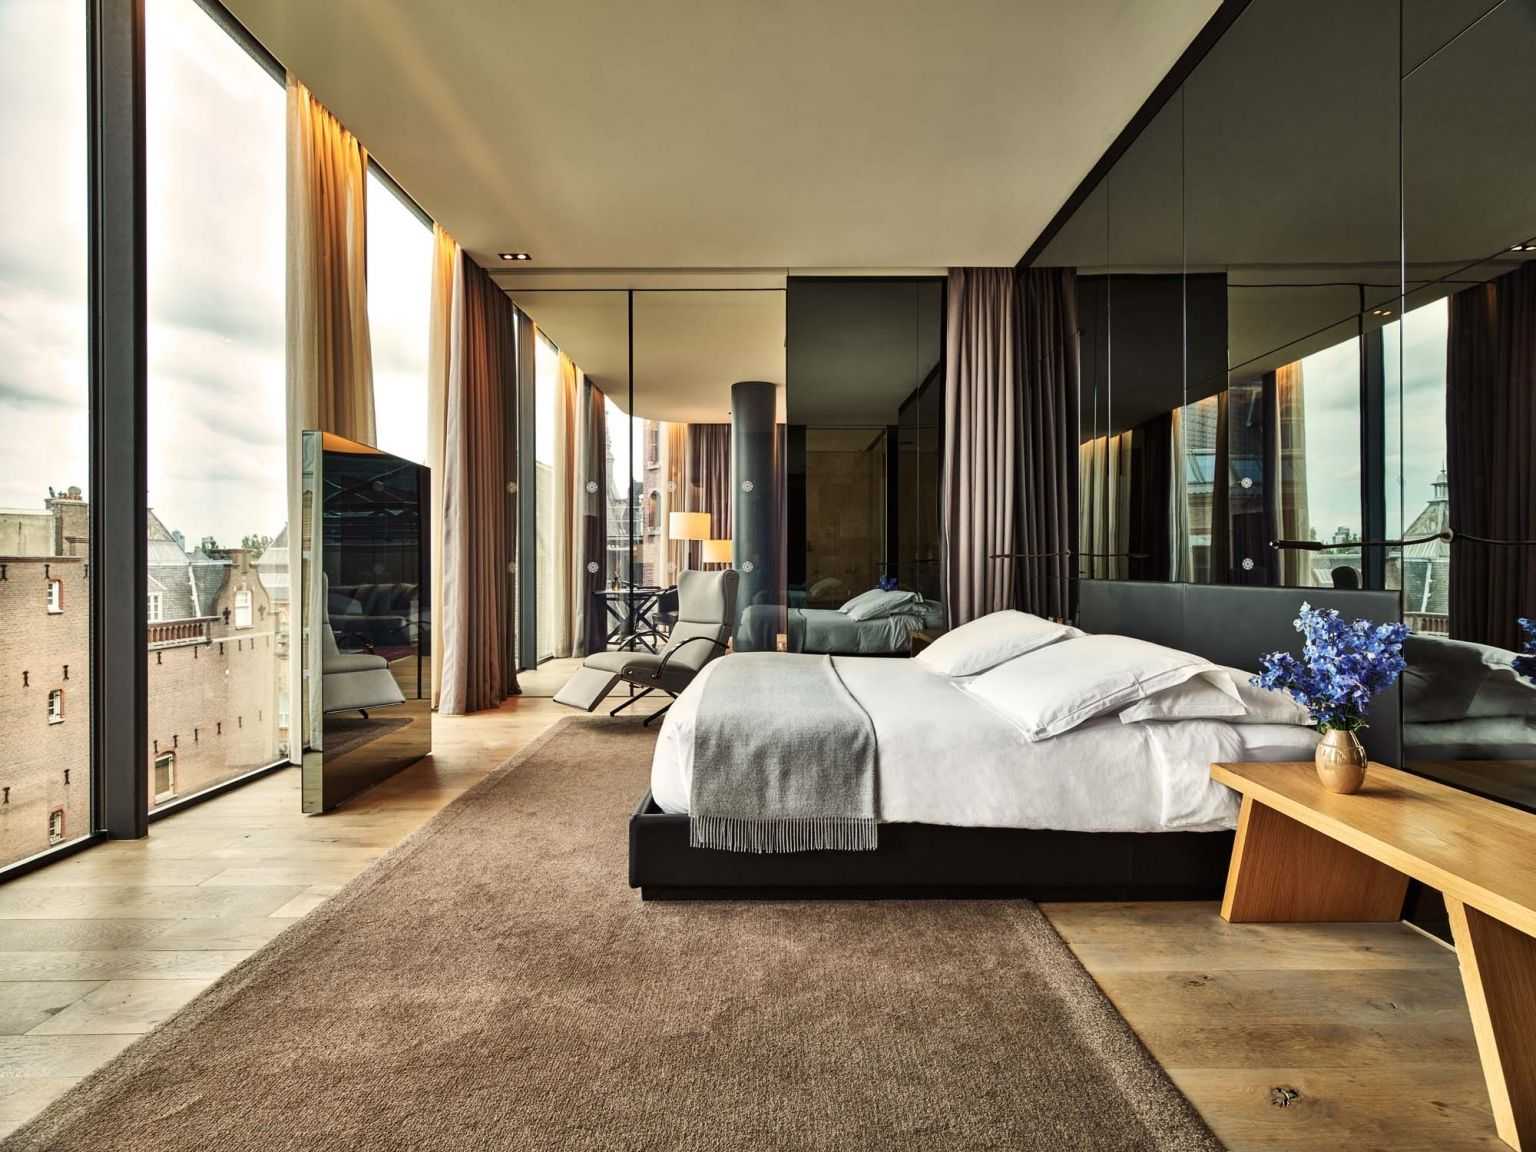 7 Ways To Make Your Bedroom Feel Like A Luxury Hotel Room